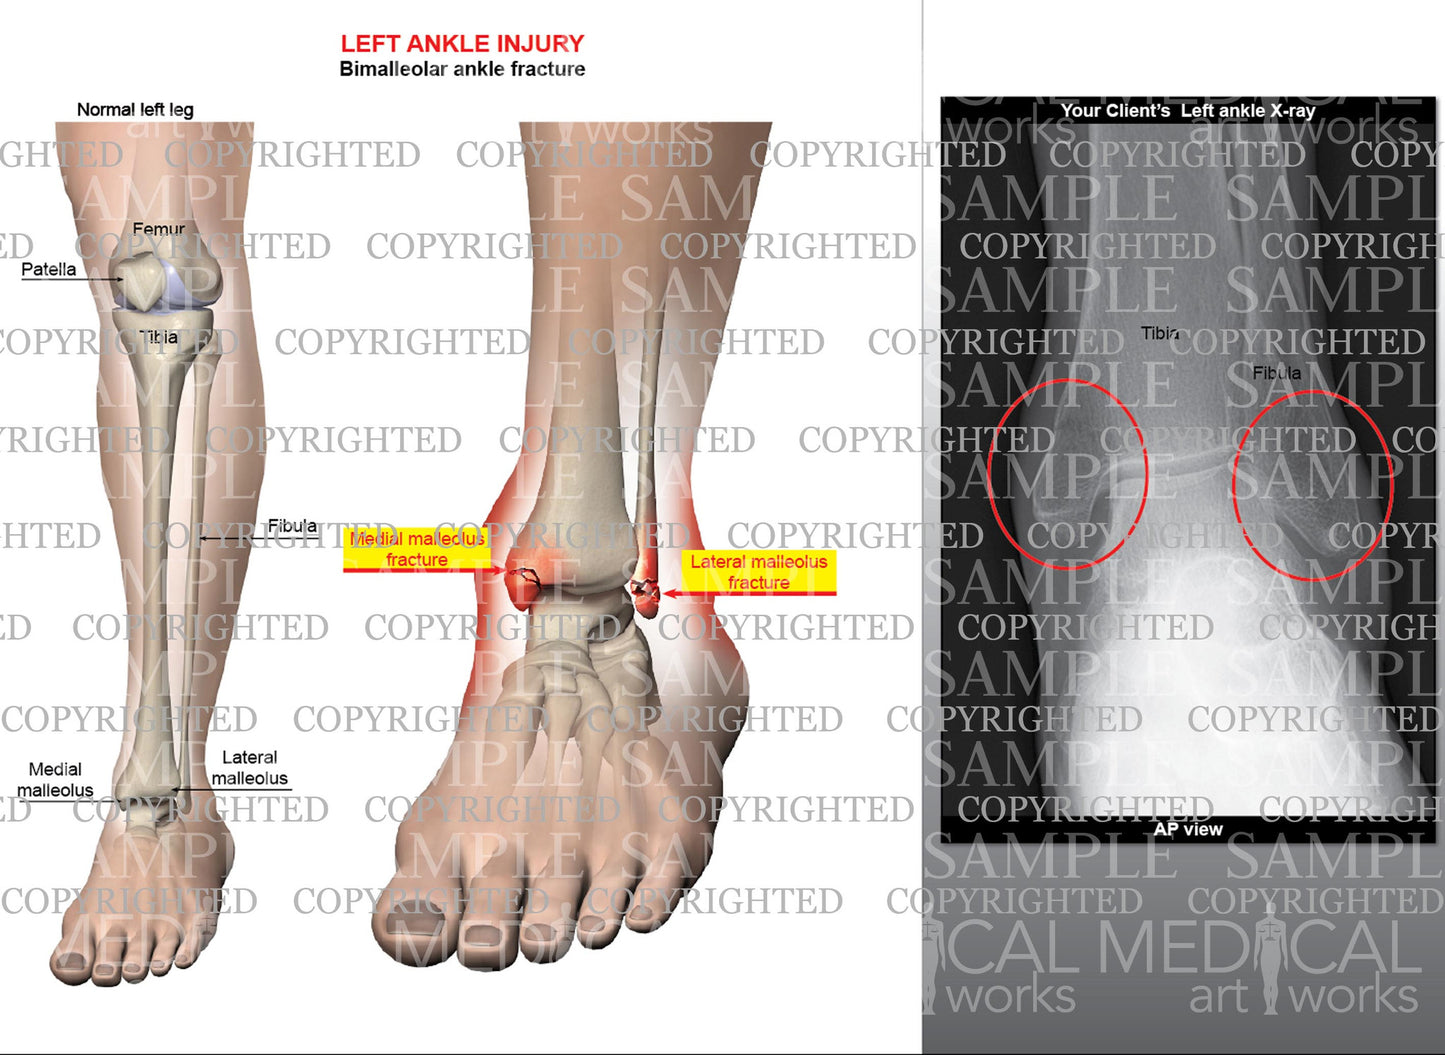 Left ankle bimalleolar fracture with injury x-ray